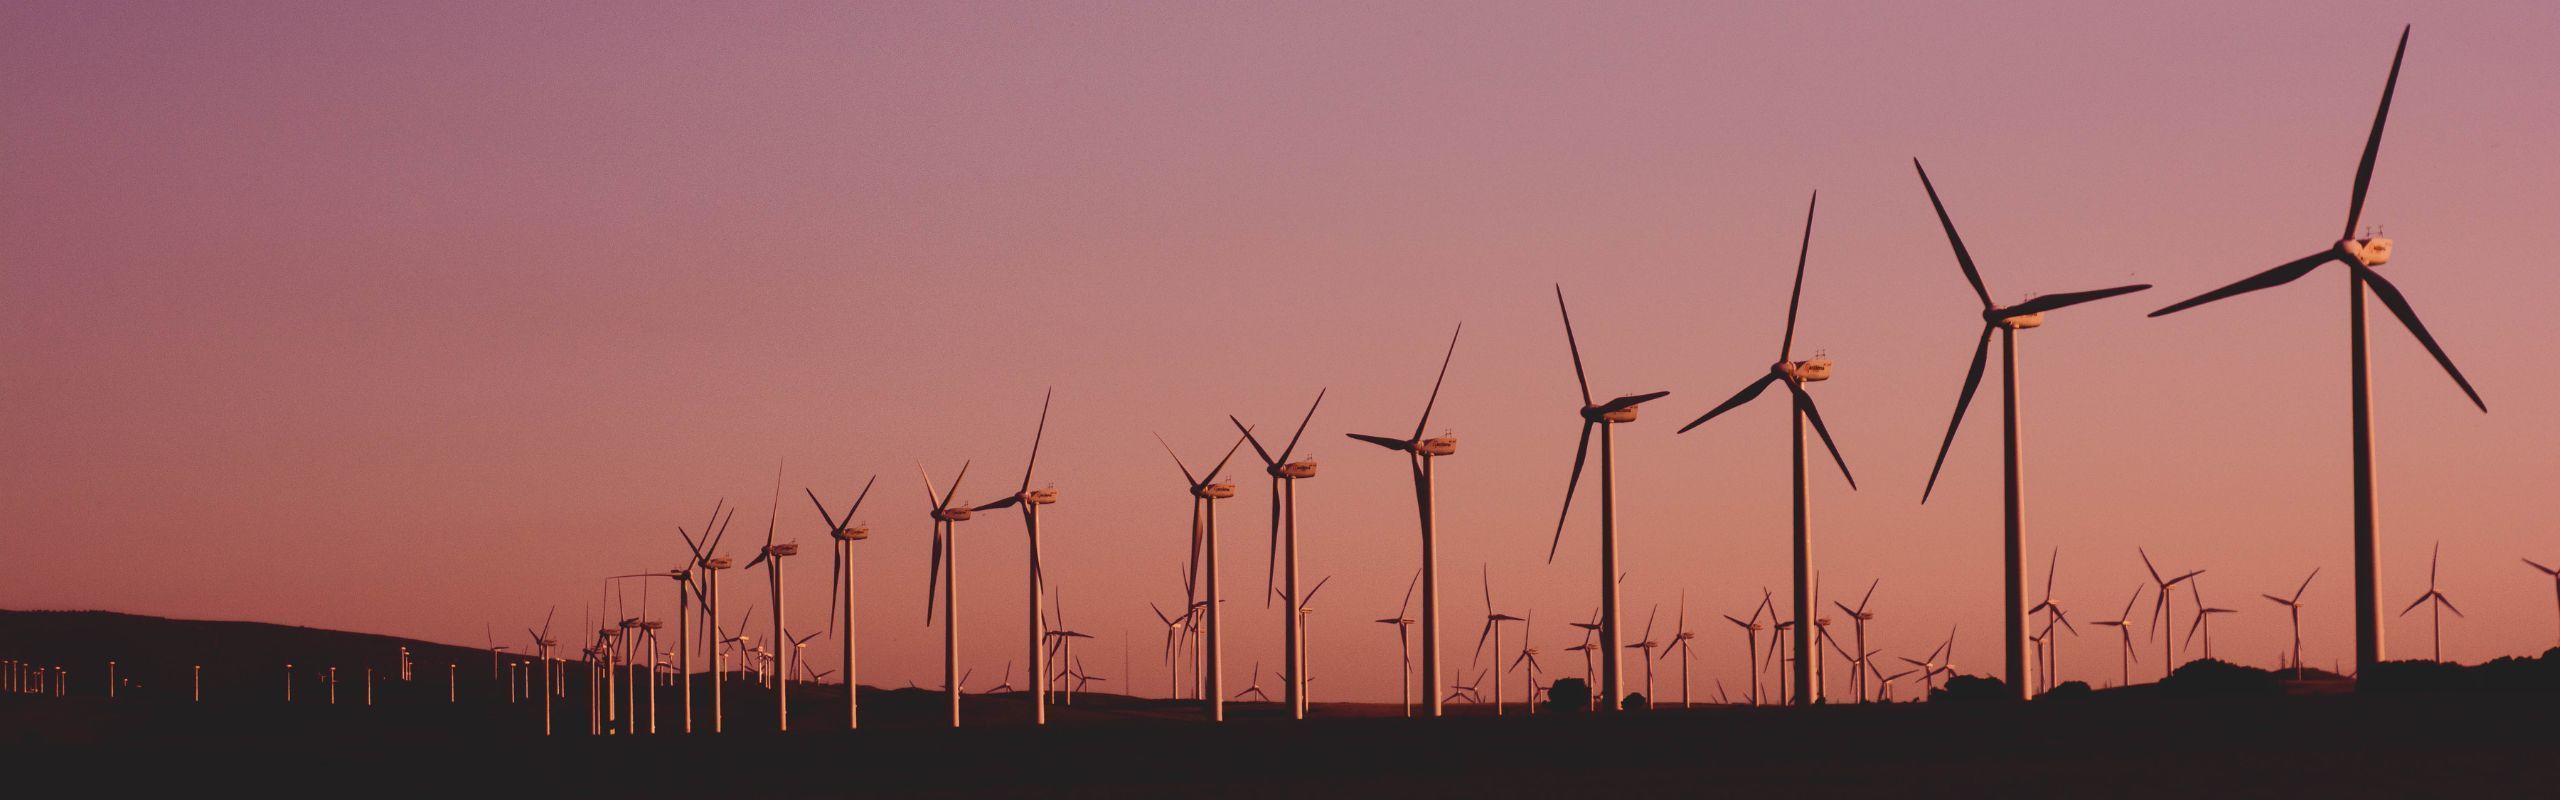 Horizontal image of wind turbines in a line against a pink and purple sunset sky.